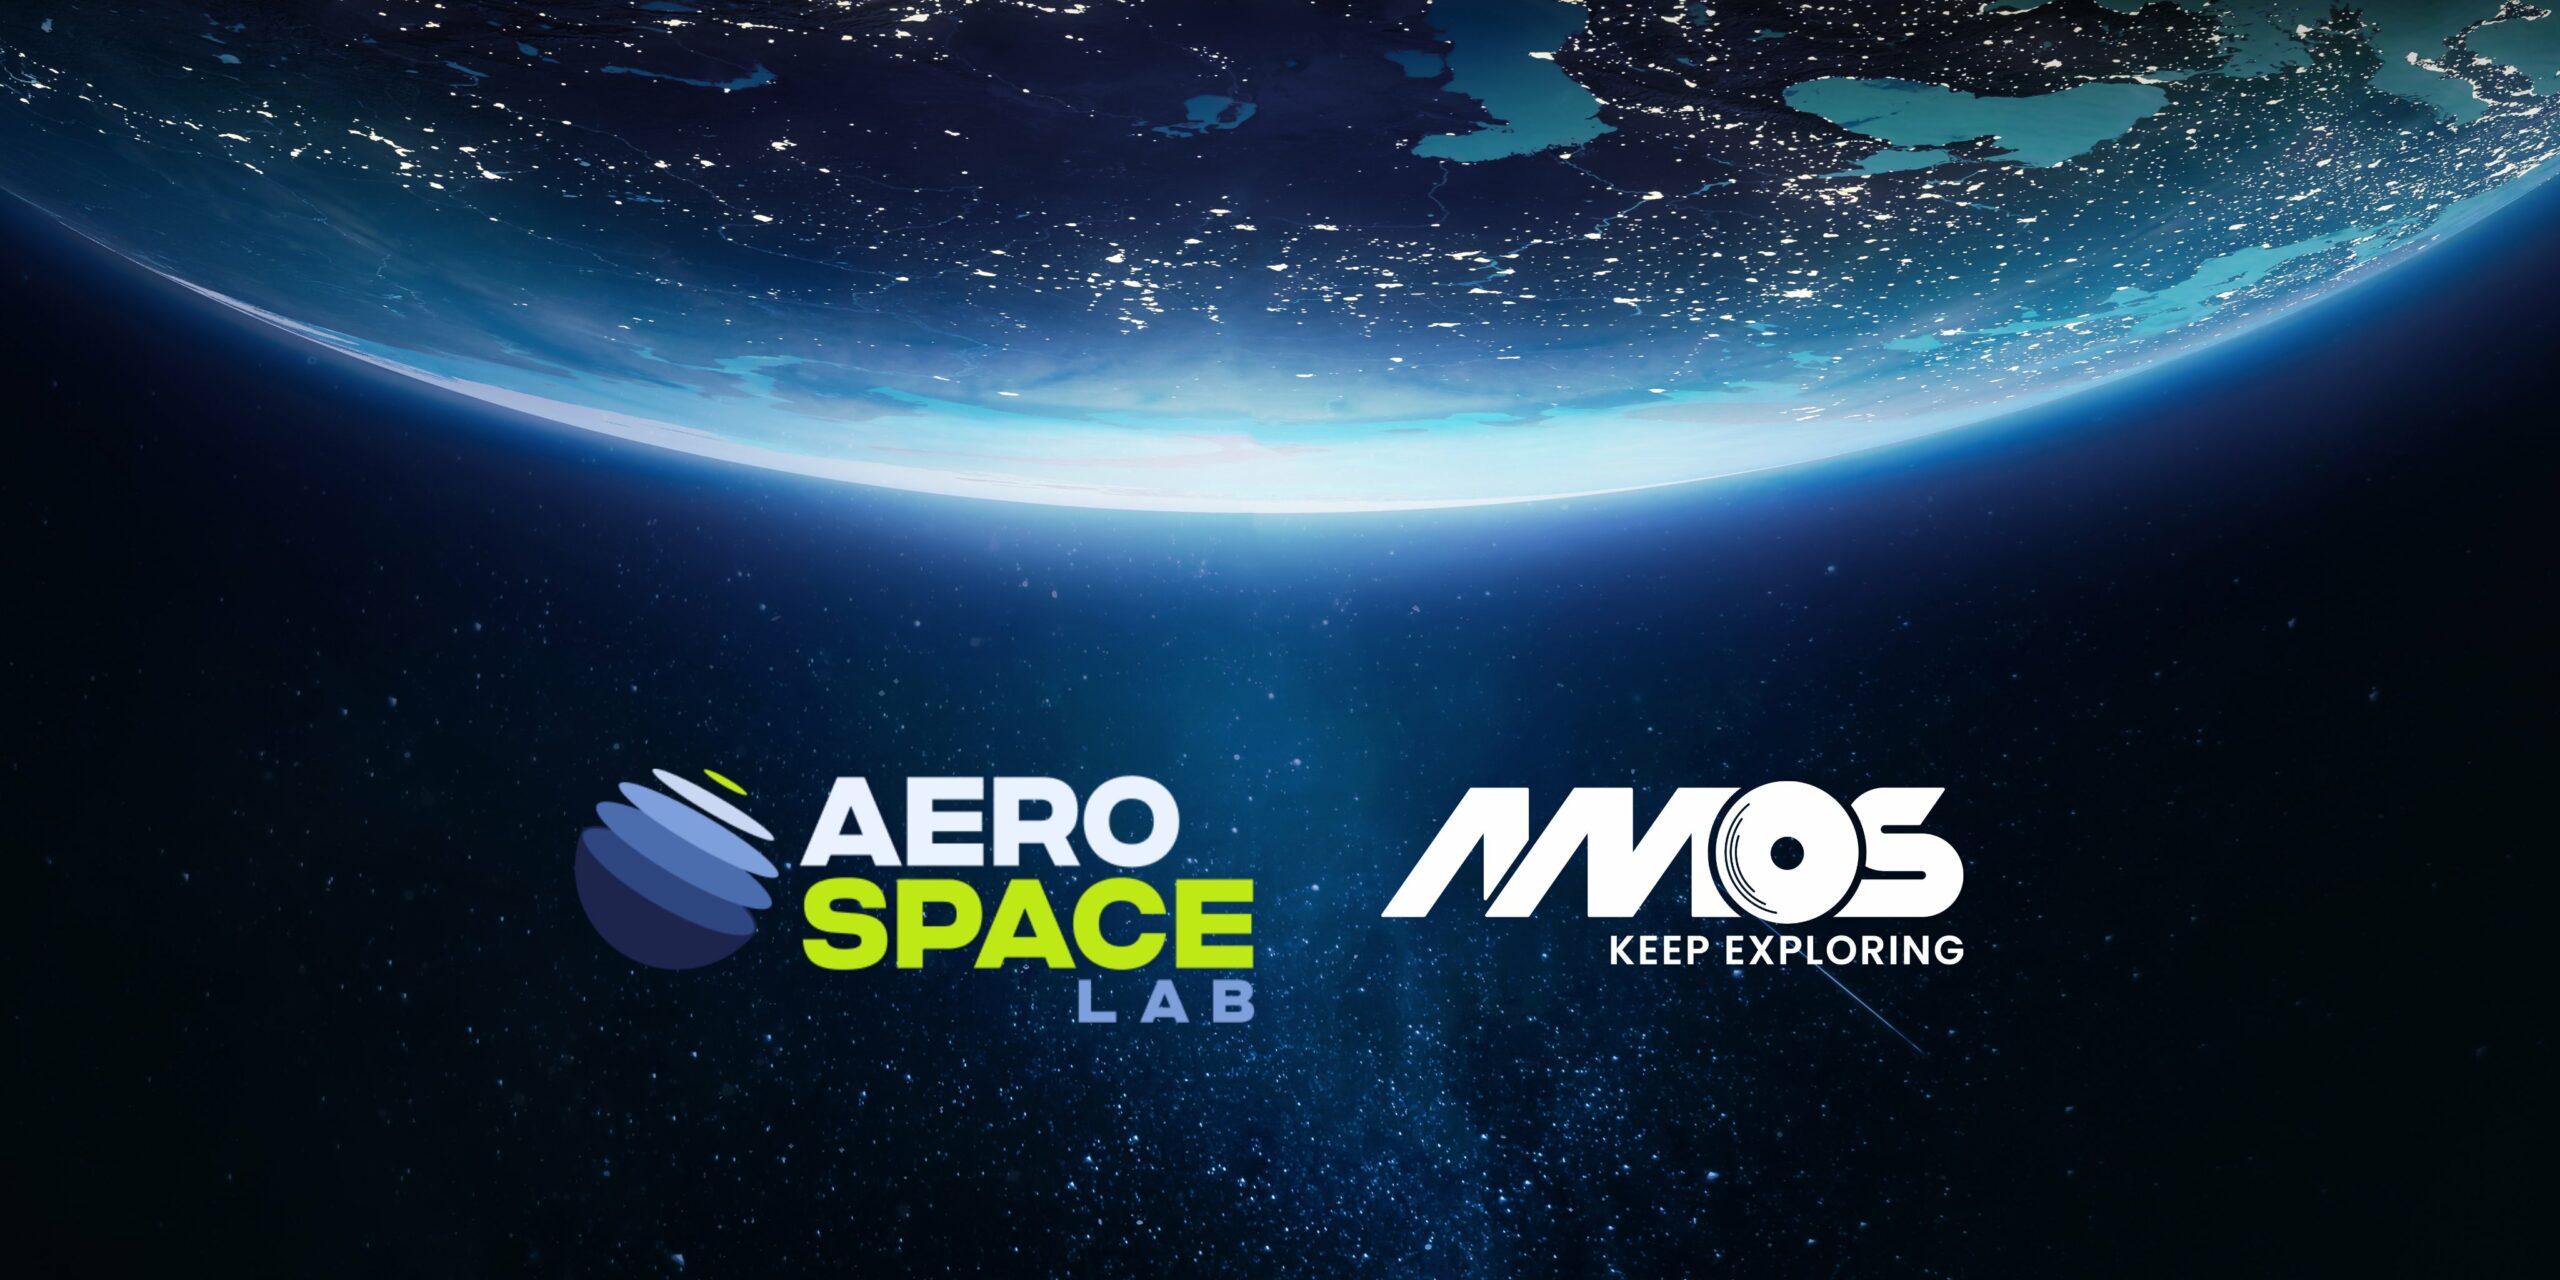 Aerospacelab and AMOS logos over a photo of a view of Earth from space